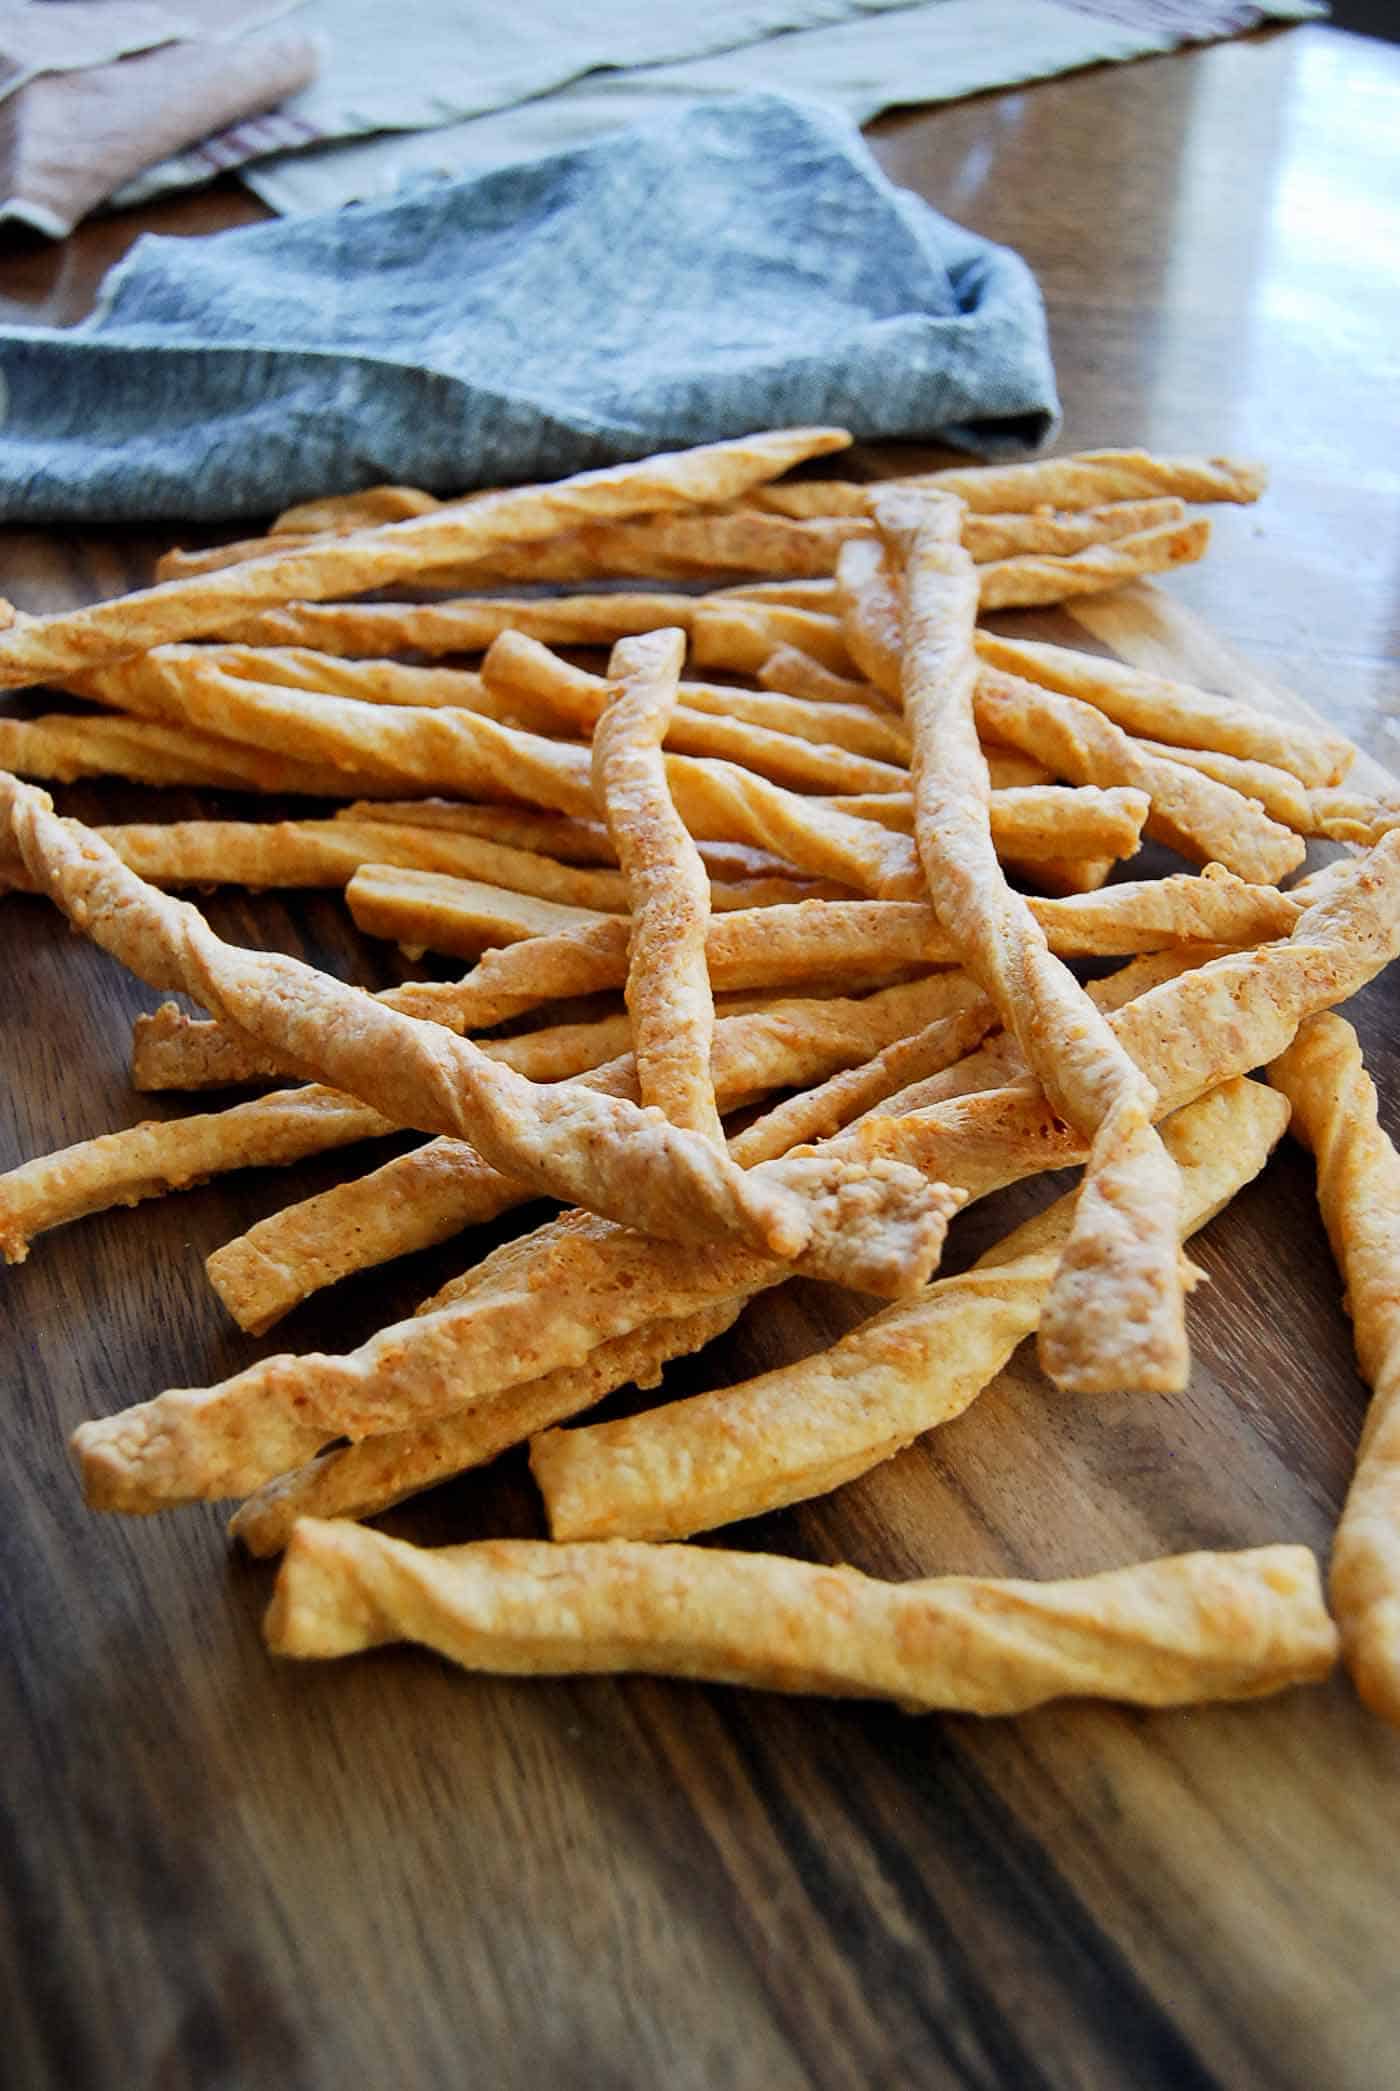 baked cheddar cheese straws on serving board.